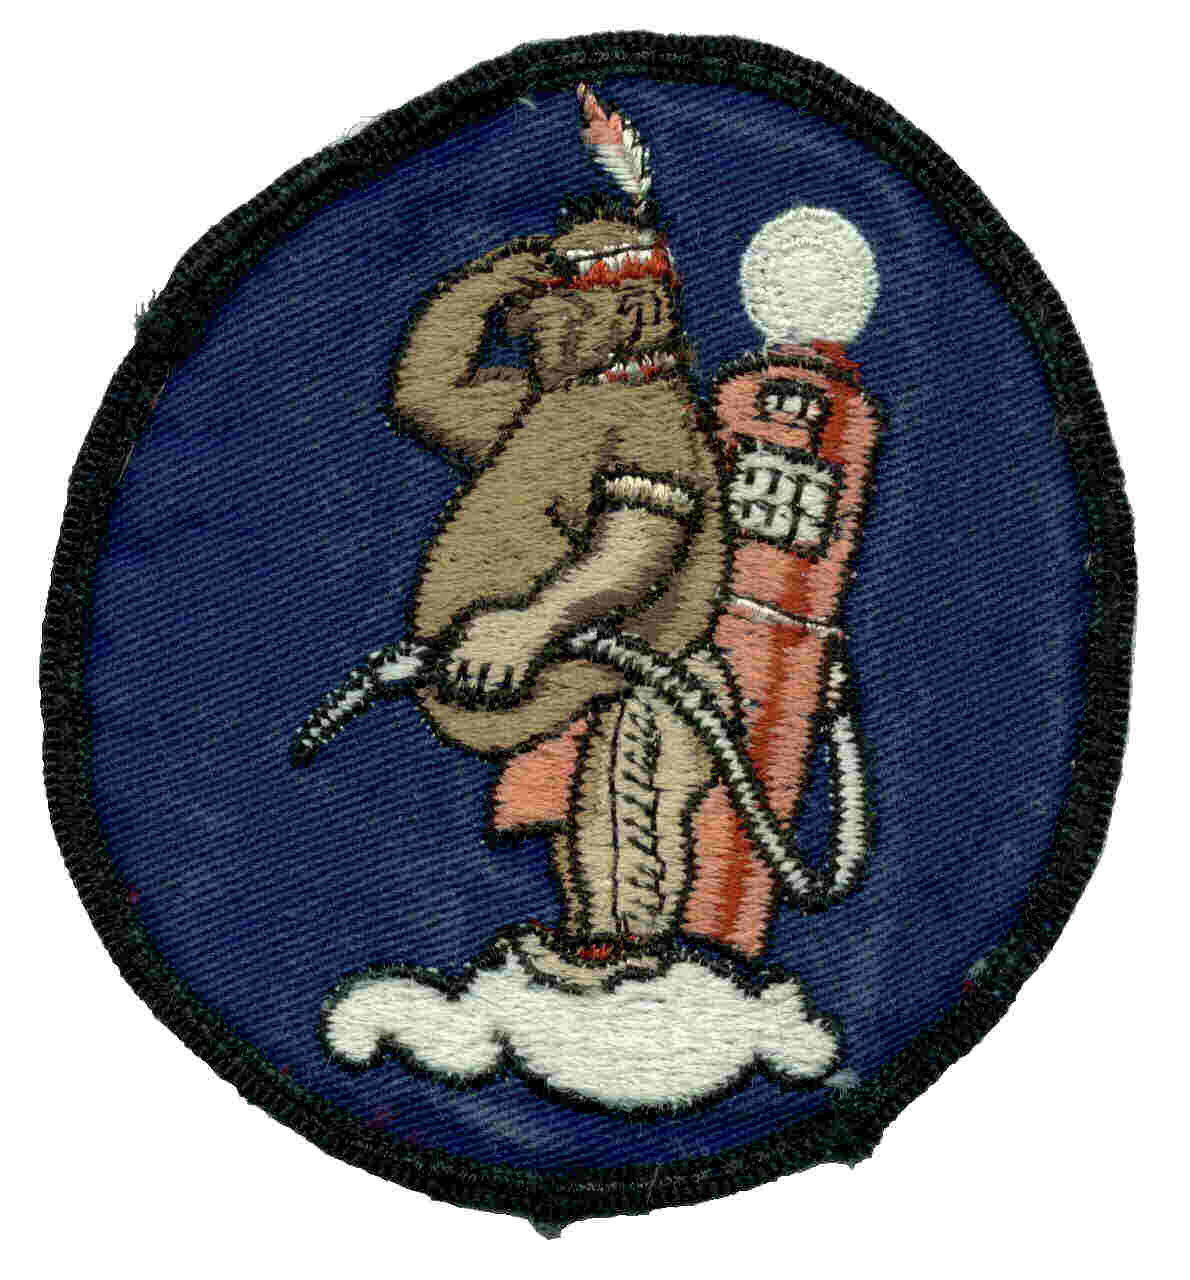 9th AREFS patch.